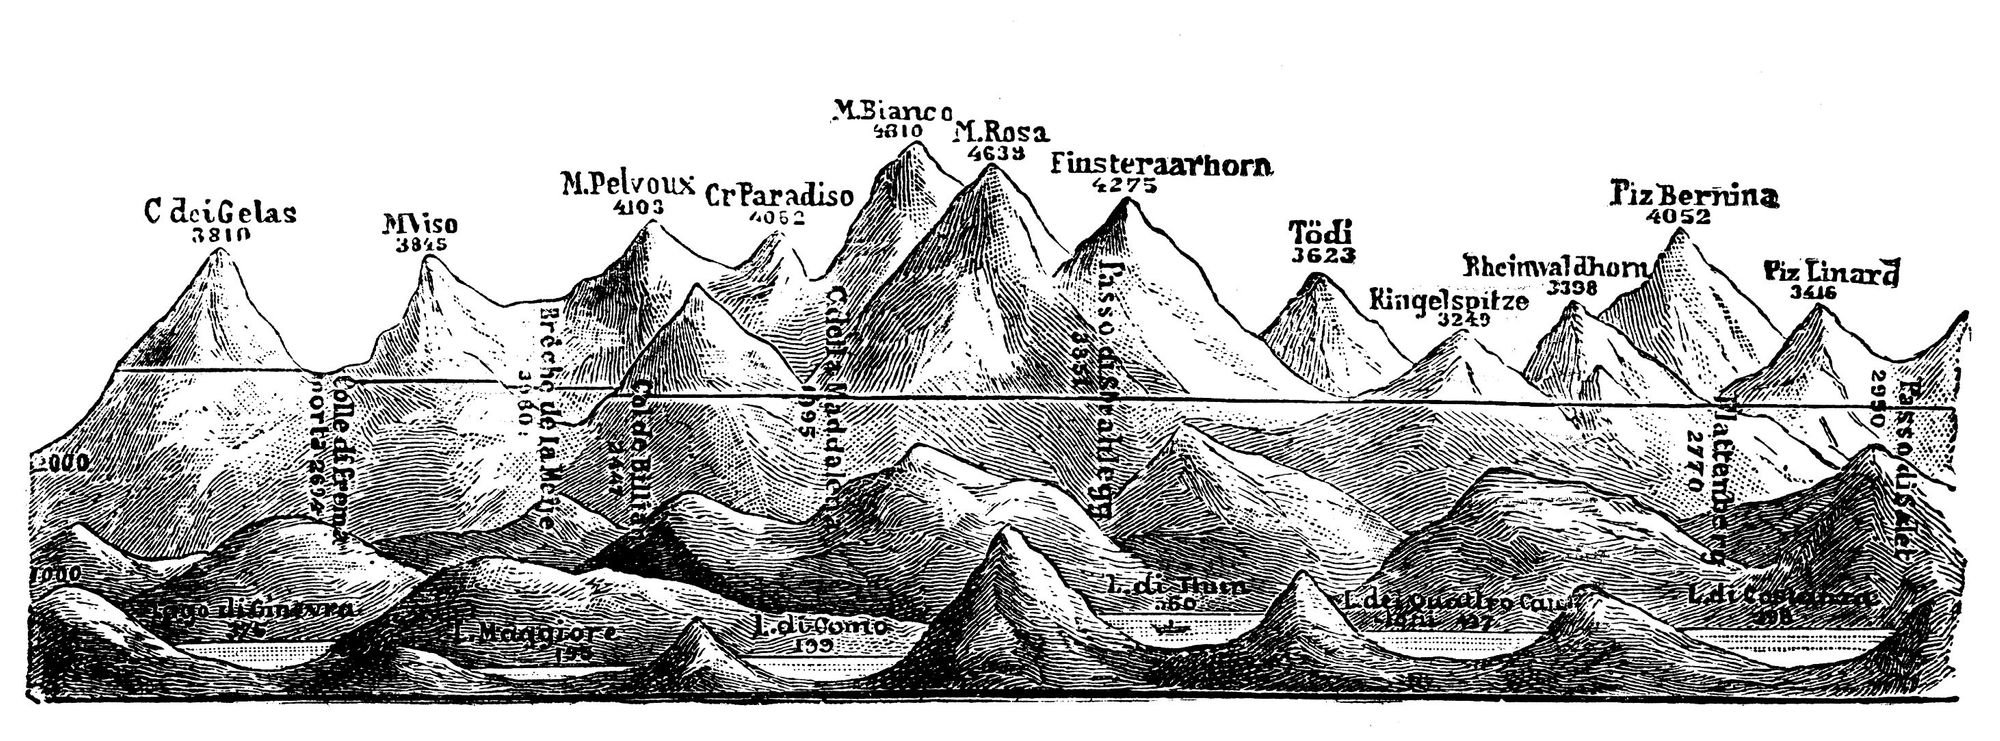 An old image showing the heights of the mountains in the Alps, visible from the Monte Rosa. Illustration: Getty